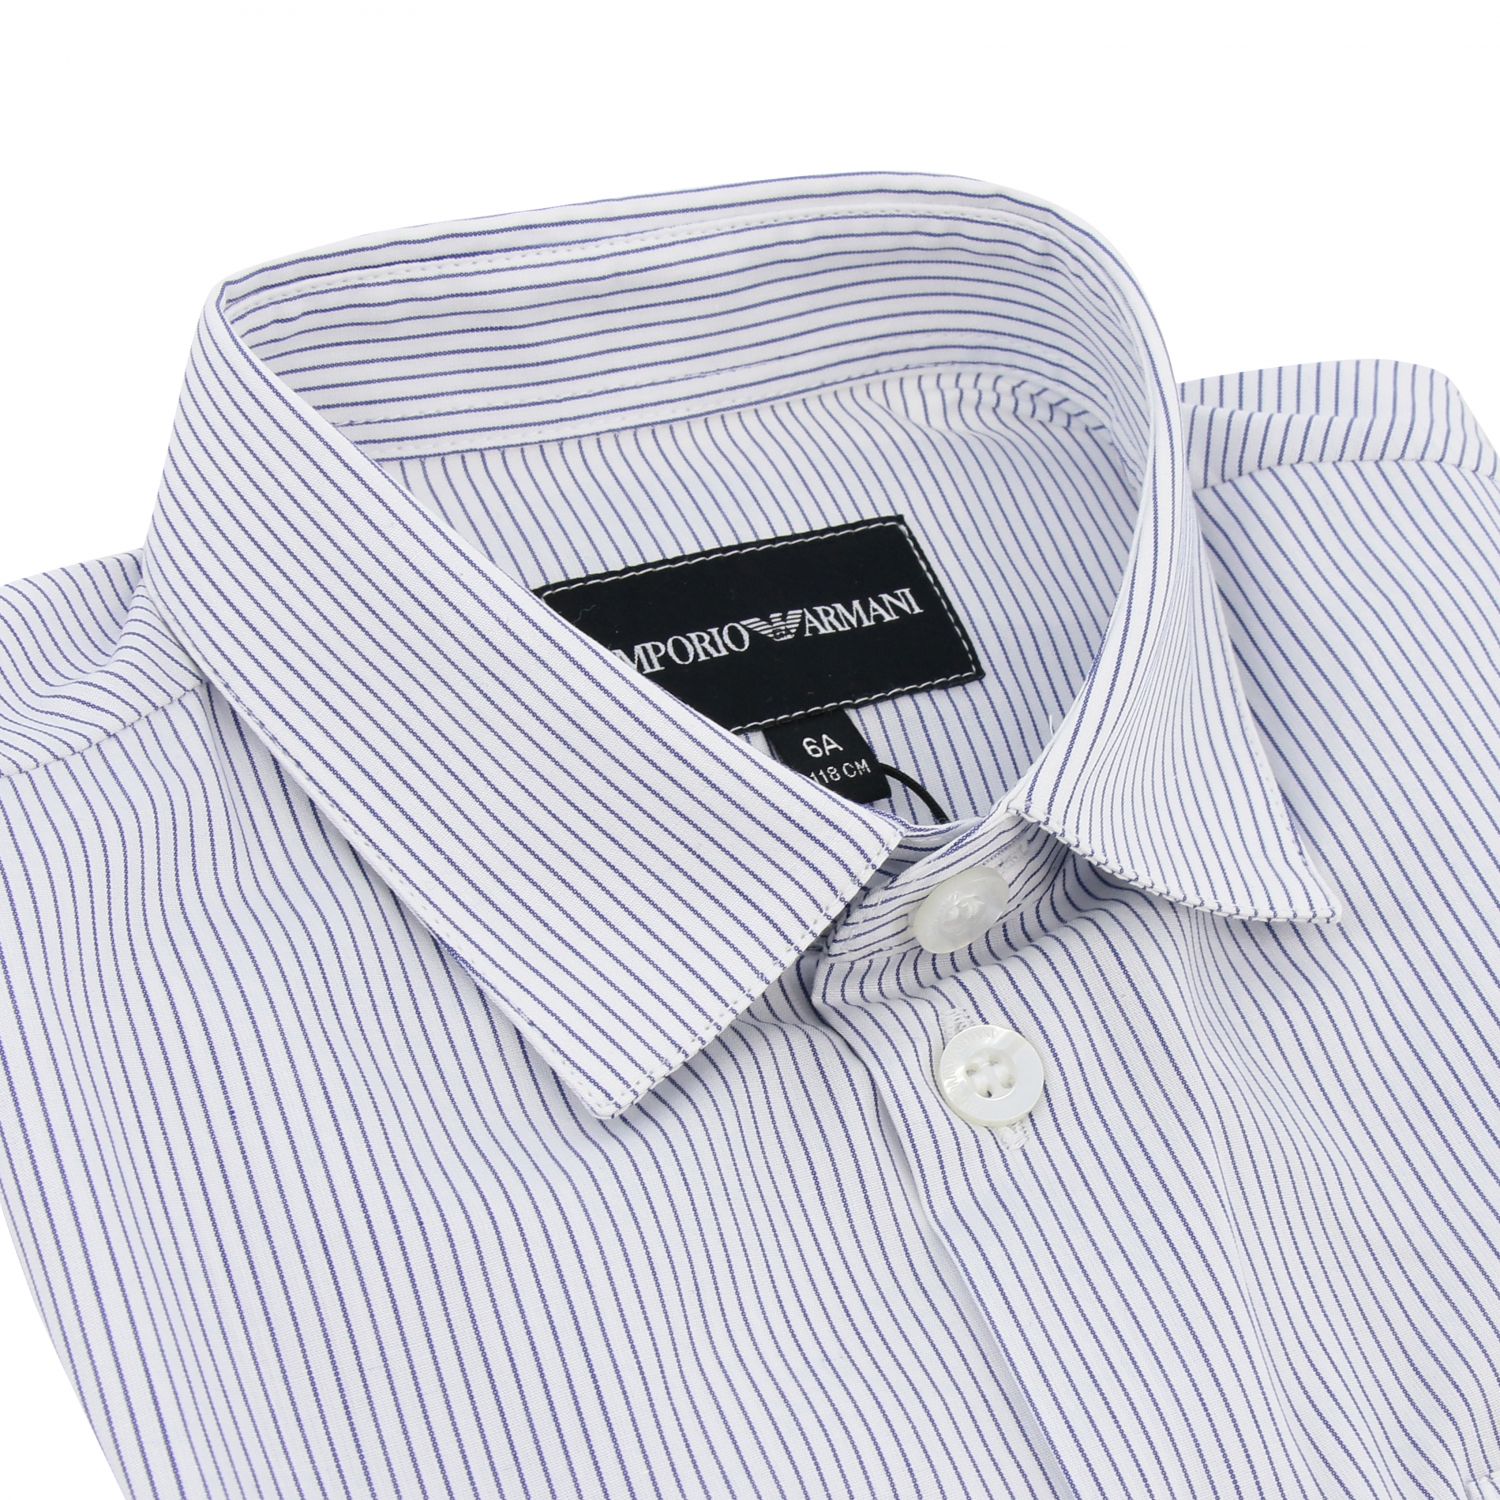 Emporio Armani striped shirt with patch 